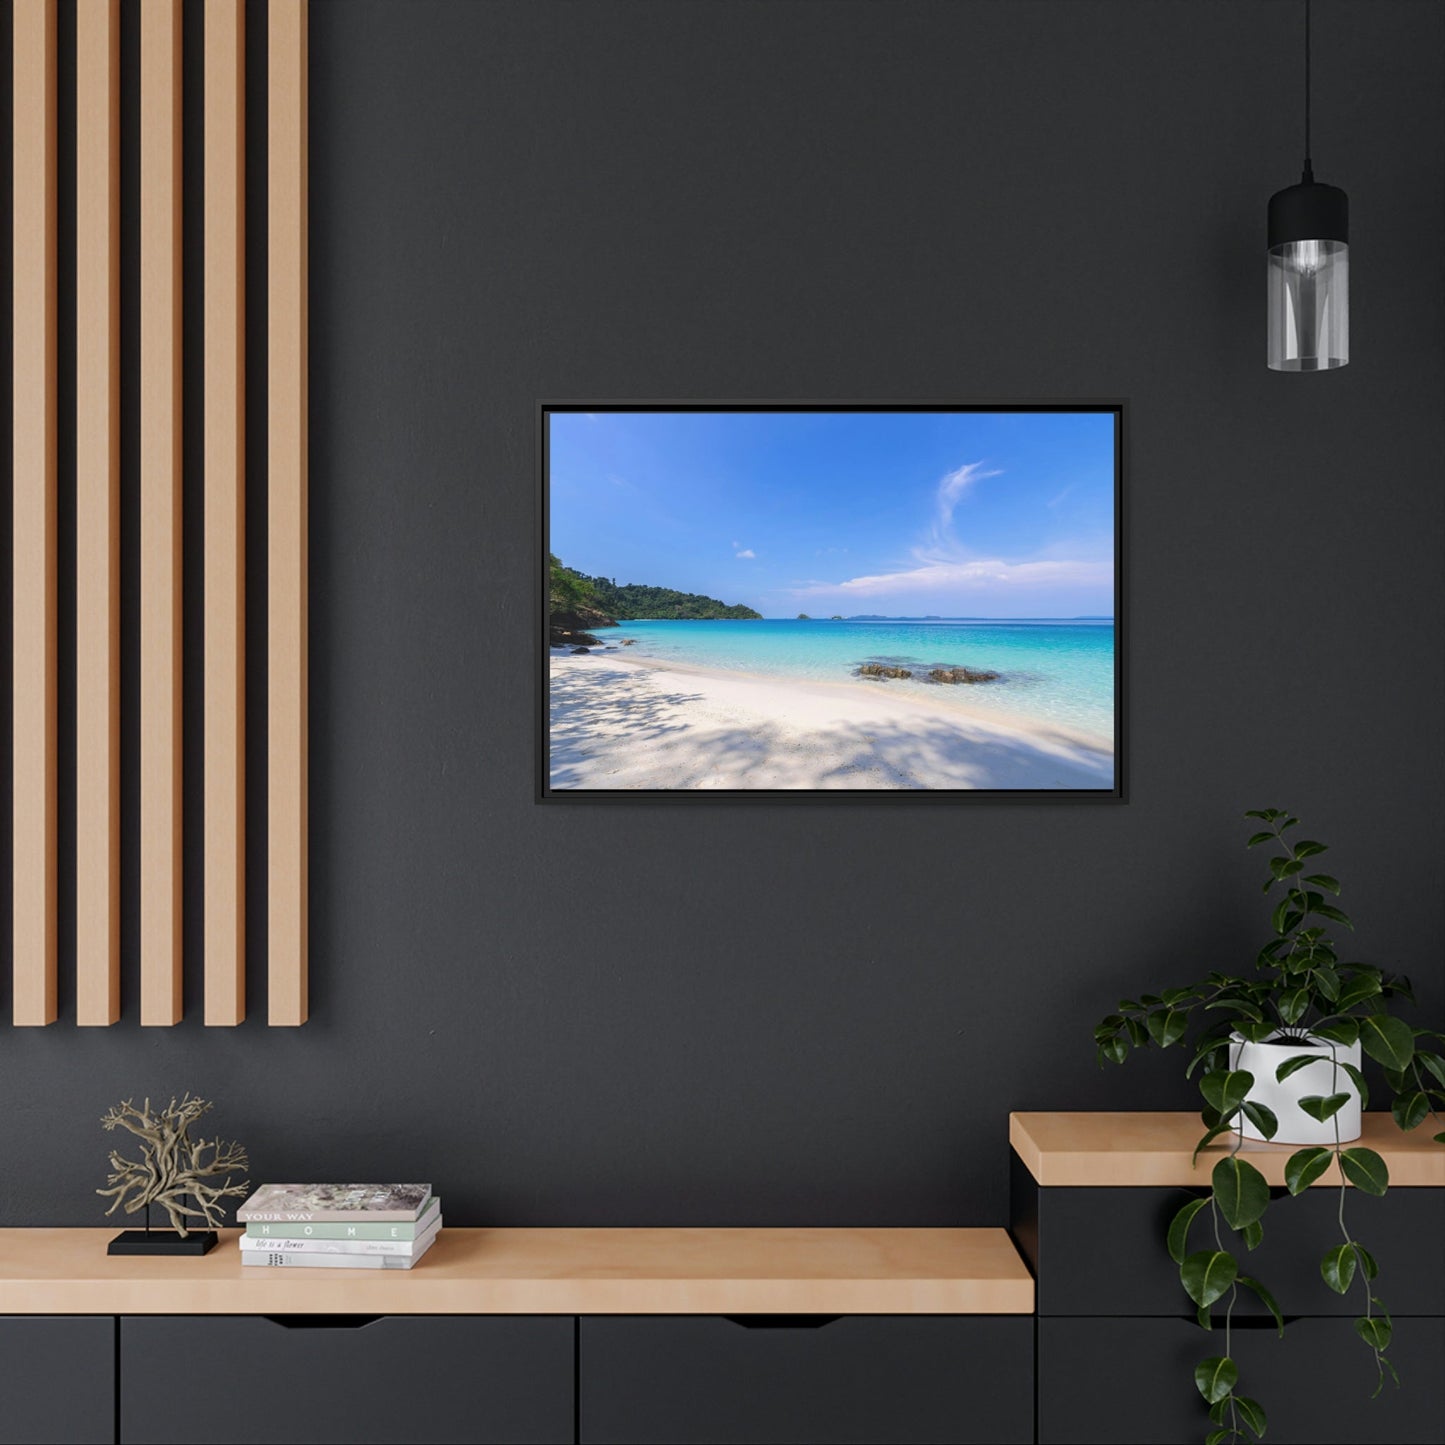 Paradise Found: Framed Poster of a Stunning Beach Scene on a Tropical Island